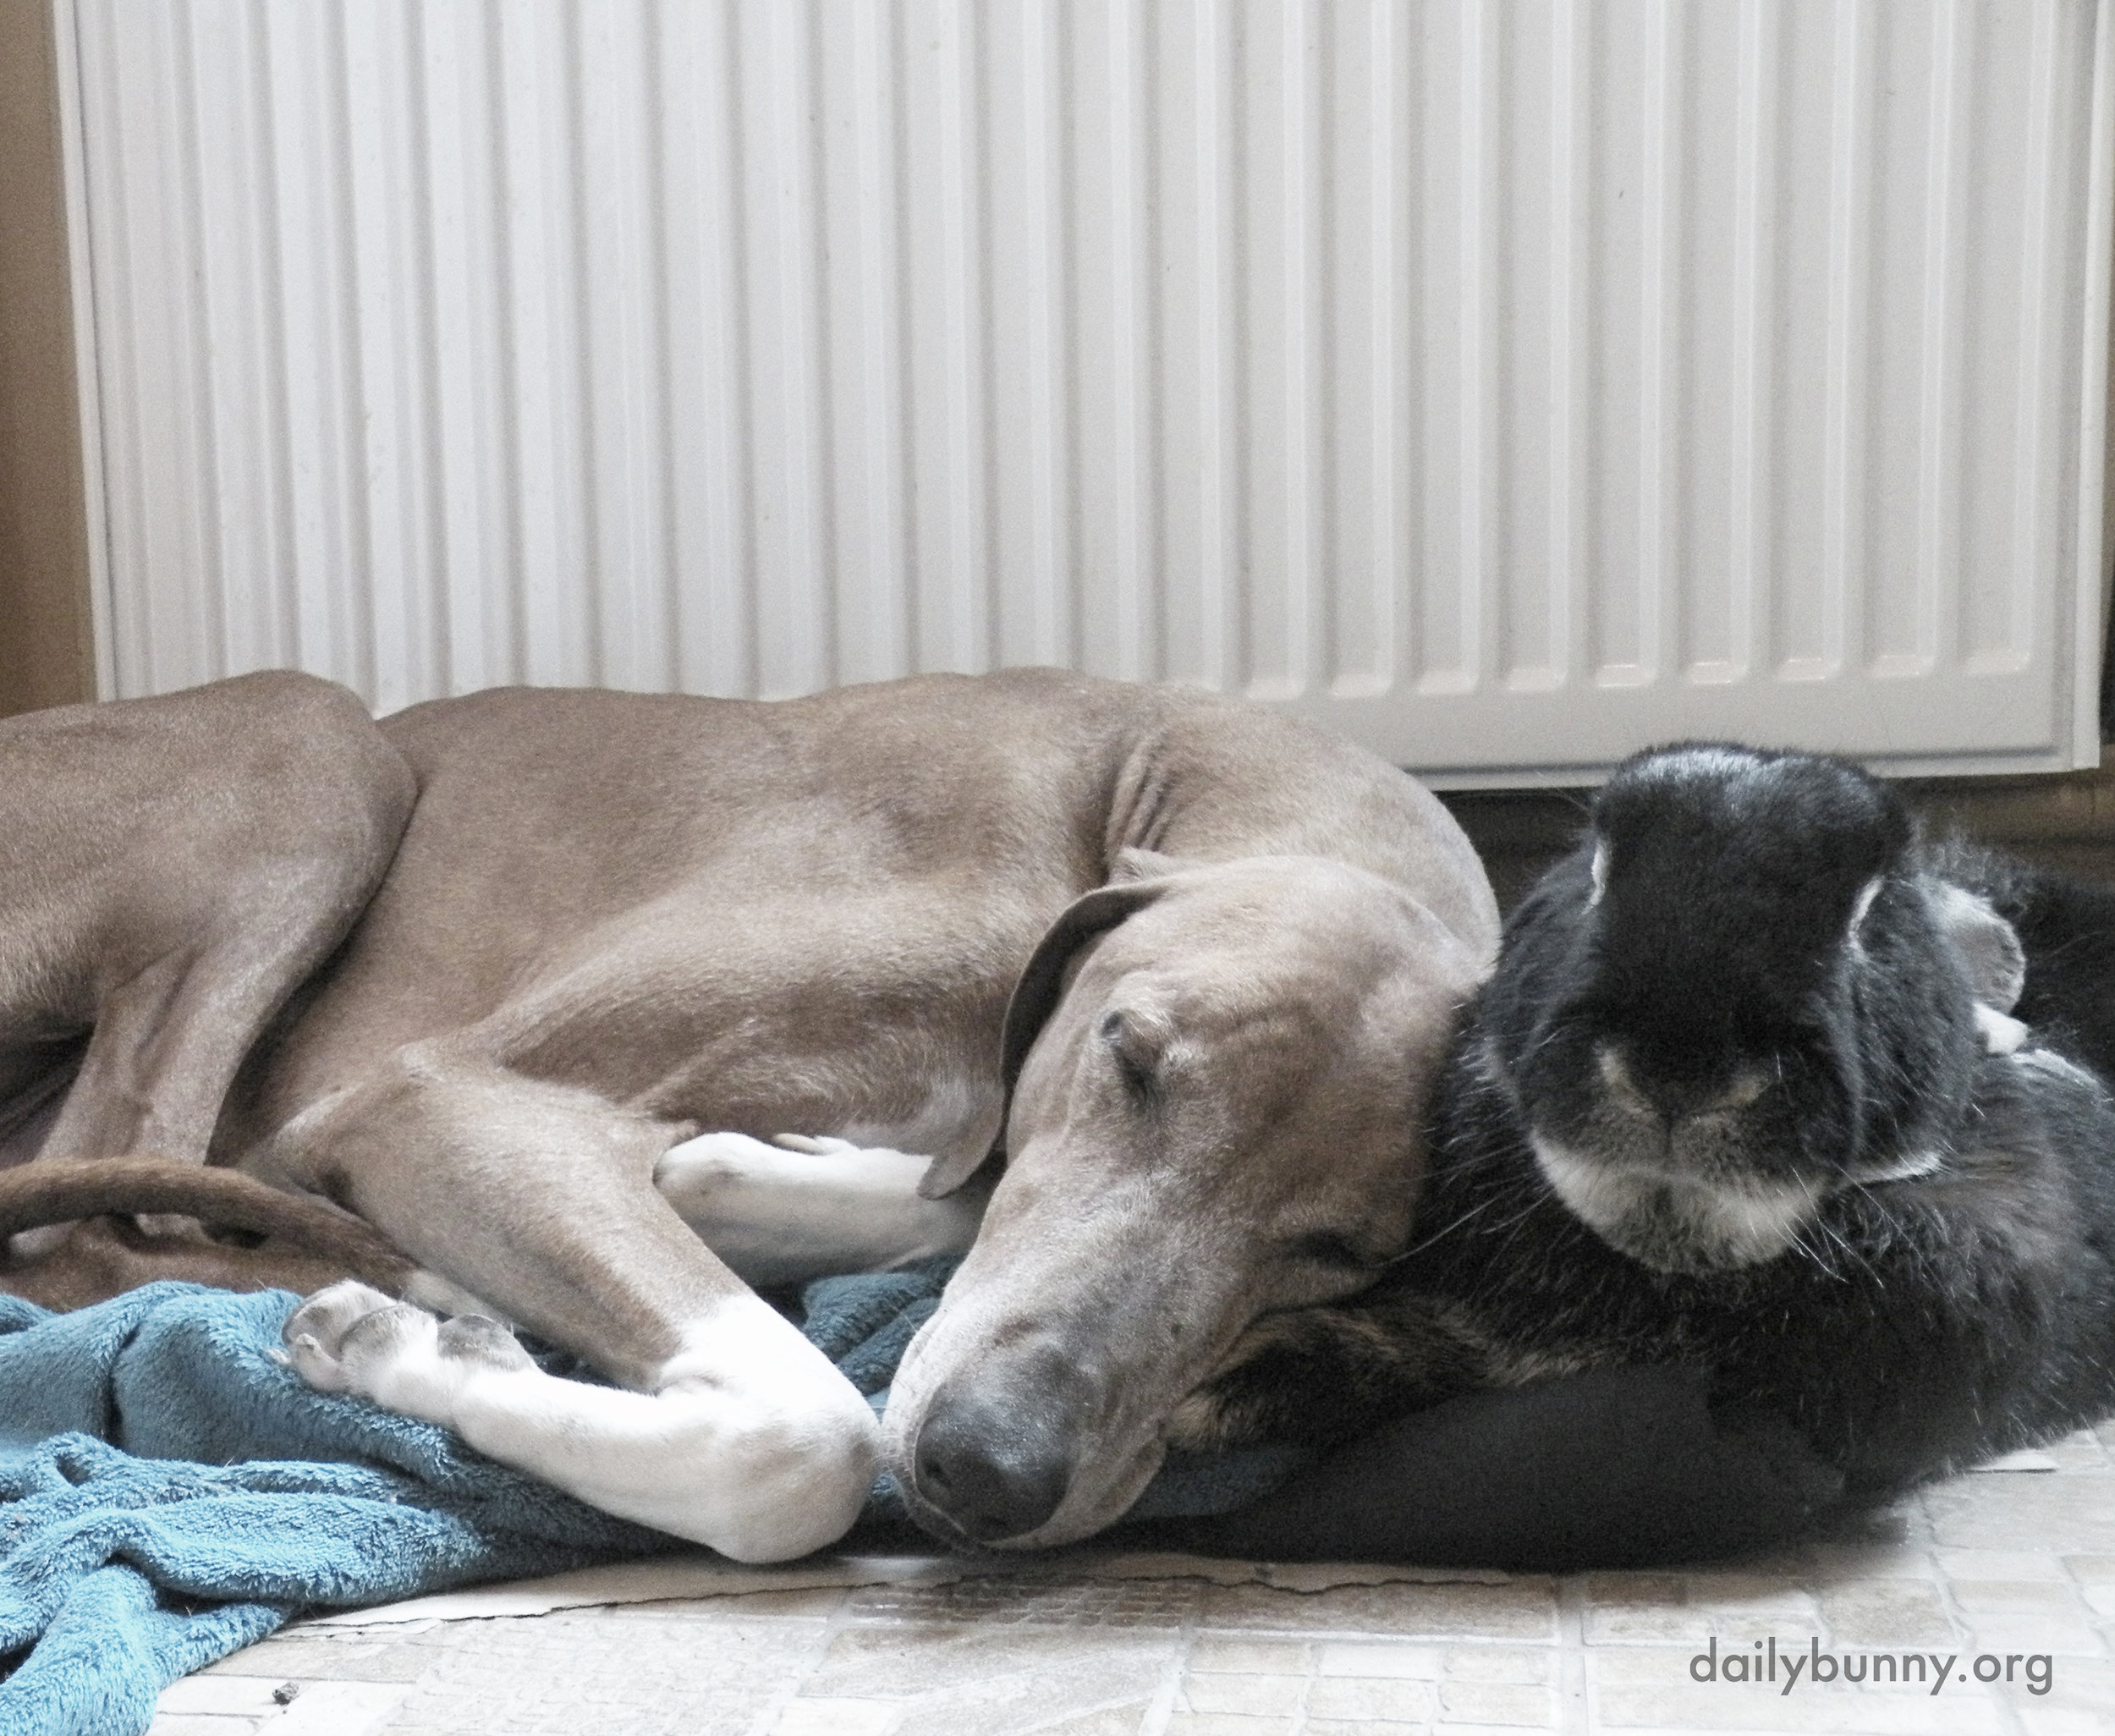 Bunny's Dog Friend Curls Up Next to Him for a Nap